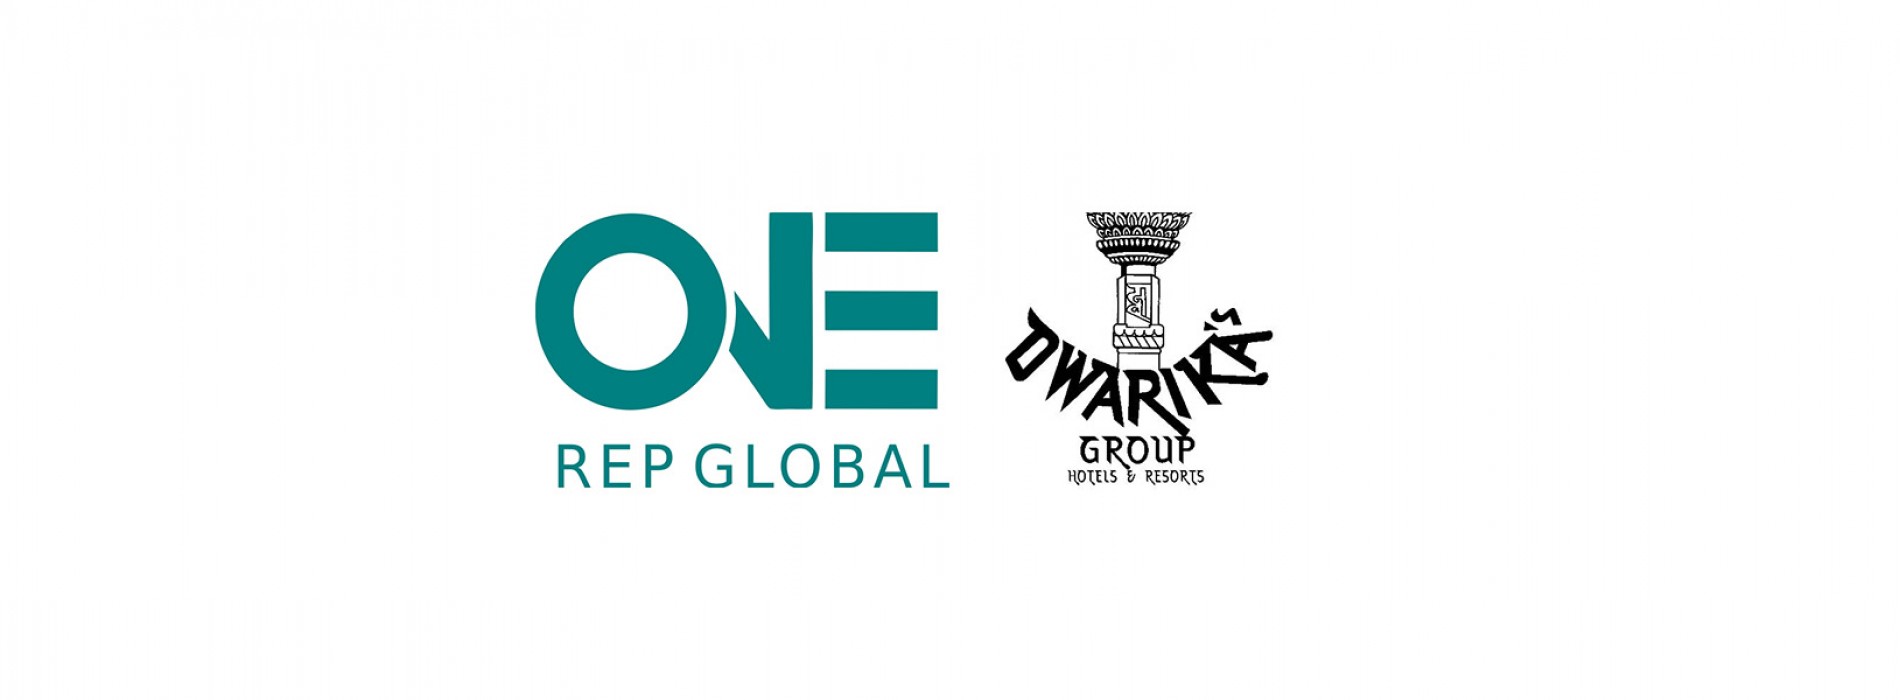 One Rep Global appointed India Representative for  Dwarika’s Group of Hotels & Resorts, Nepal